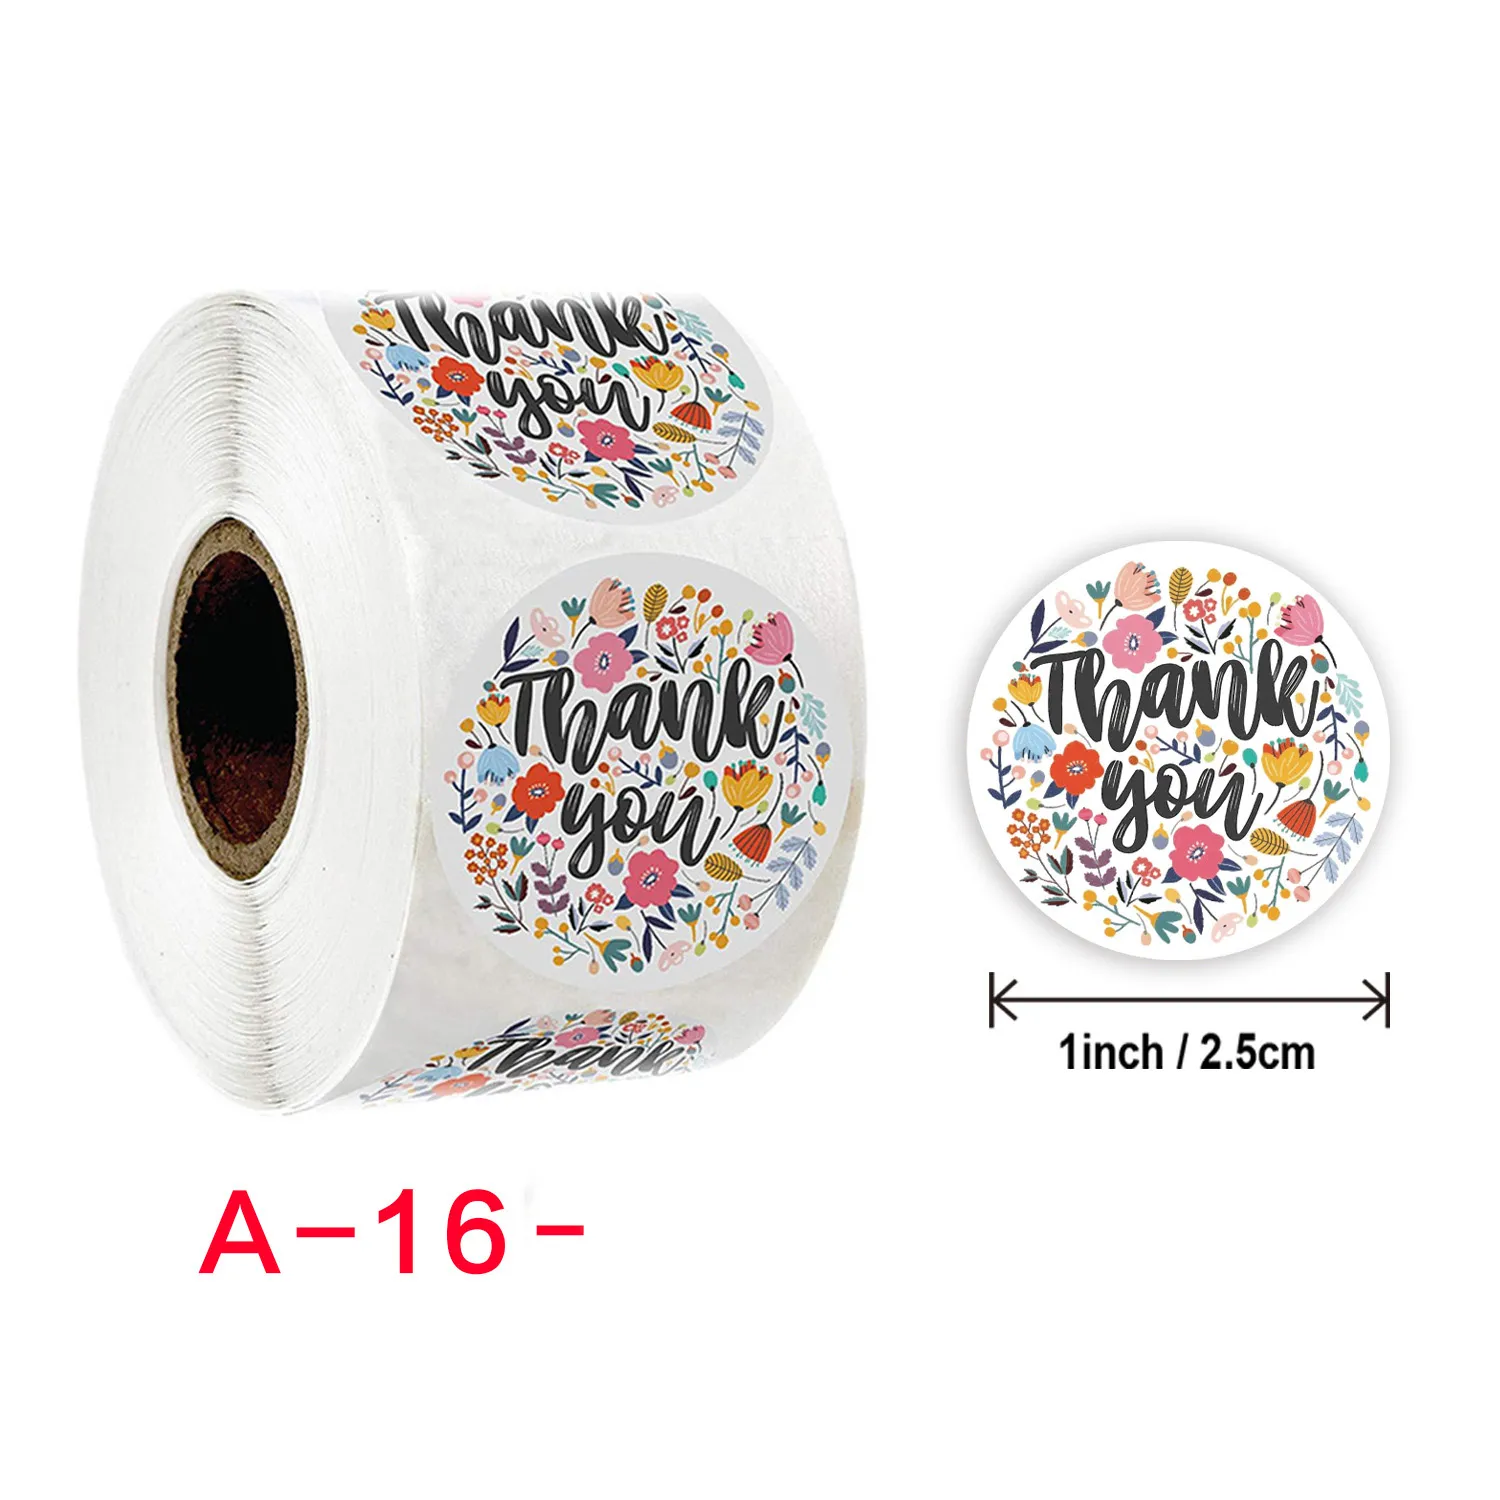 500 Thank You Round Circle Sticker Labels For Scrapbooking, Envelopes,  Gifts, Flowers, And Weddings 1 Inch 2.5cm Greenery And Stationery Labels  Perfect For Bridal Showers And Gifts From Uniquebridalboutique, $6.04